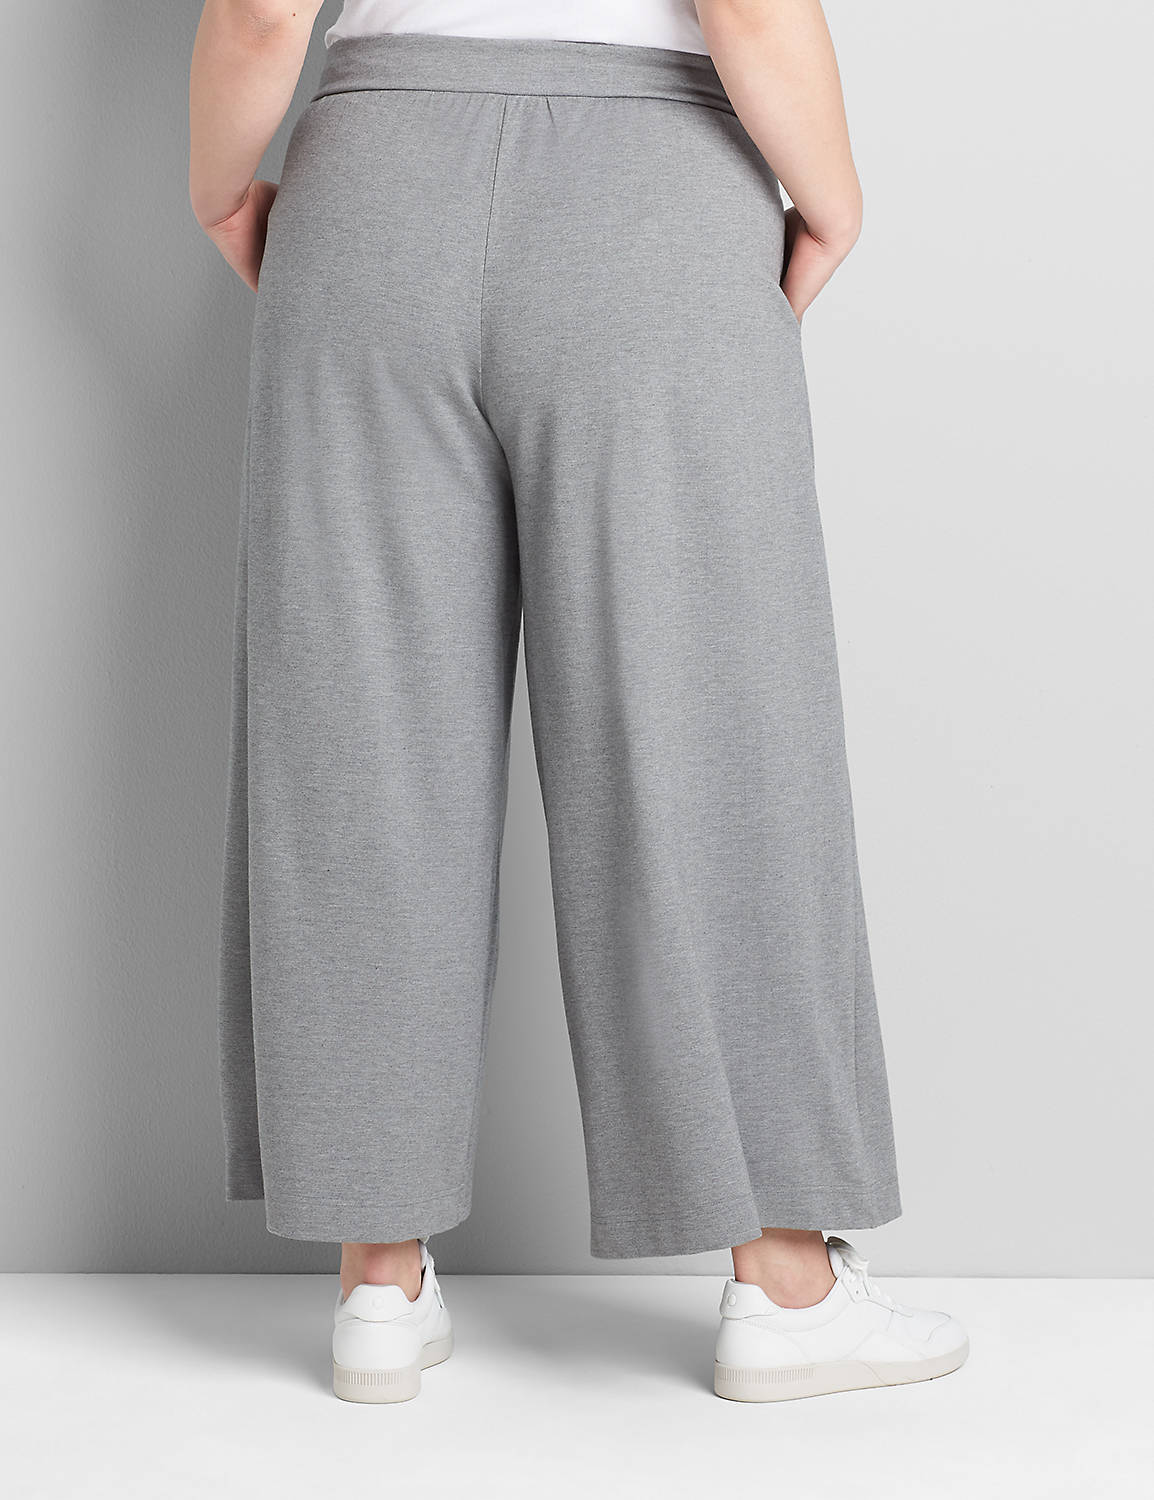 Pull-On Wide Leg Pant - Ponte Product Image 2